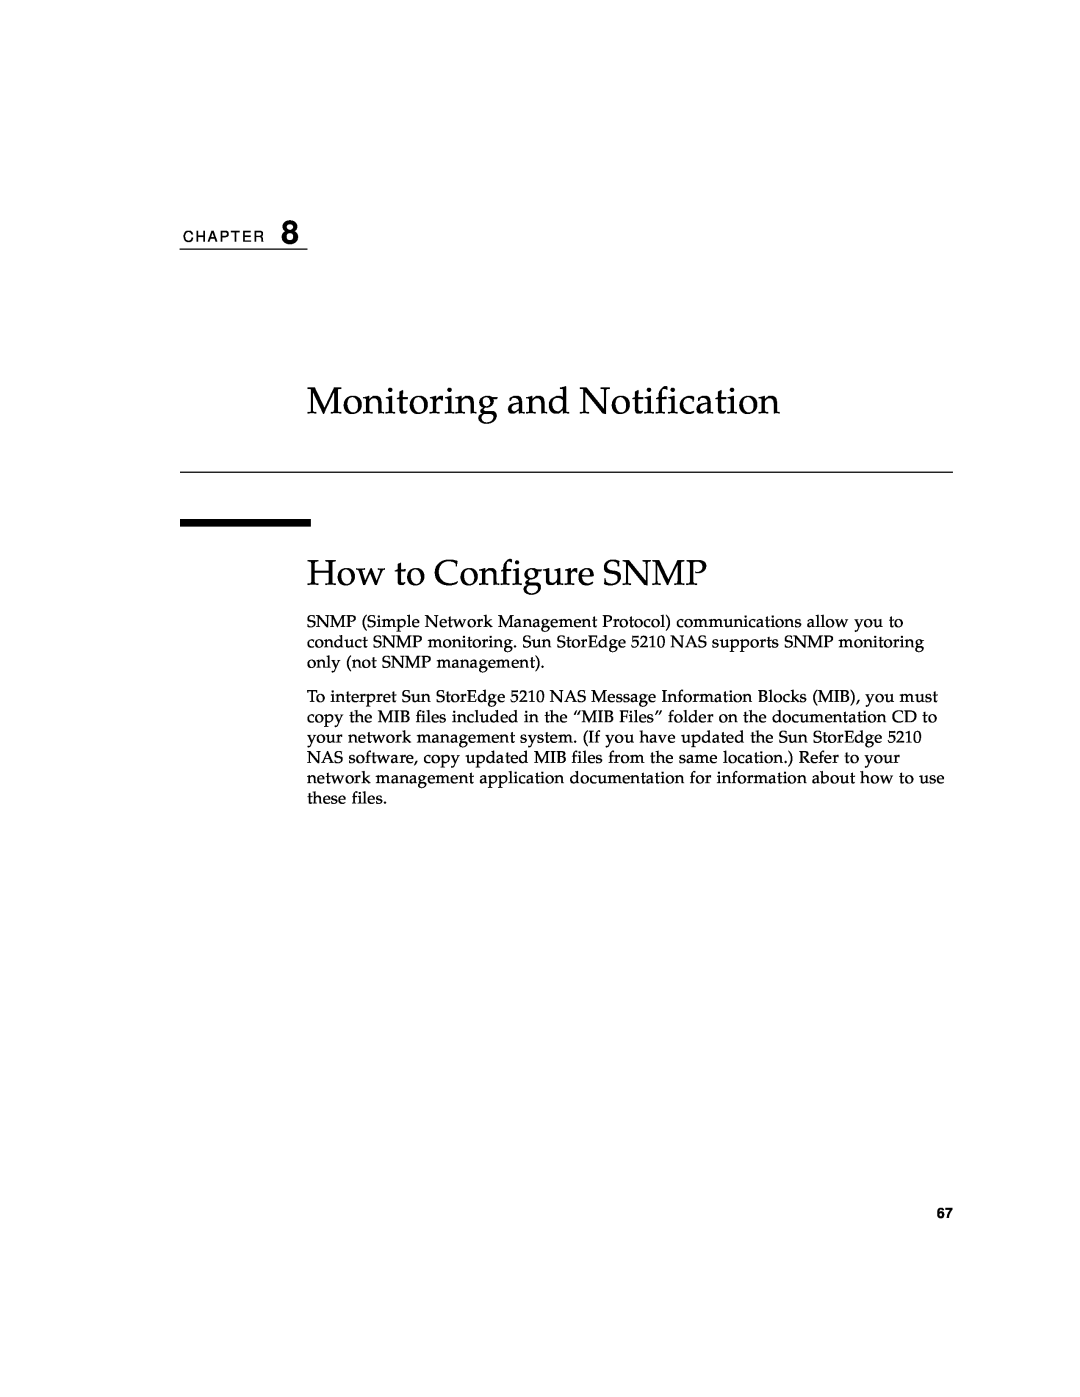 Sun Microsystems 5210 NAS manual Monitoring and Notification, How to Configure SNMP 